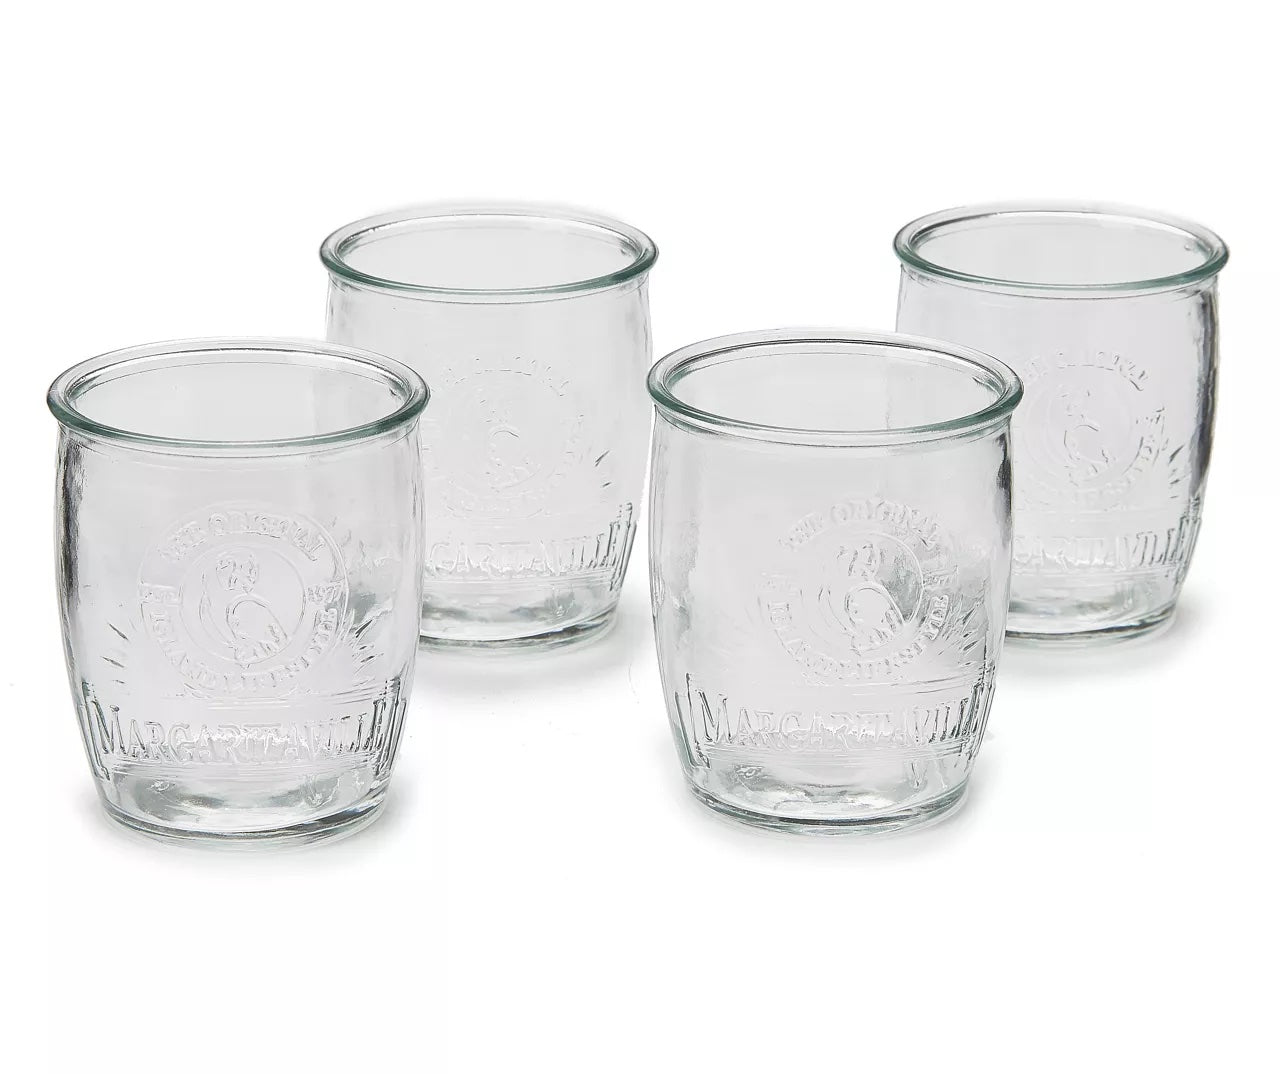 island-double-old-fashioned-glass-set-8116-new-clear-3